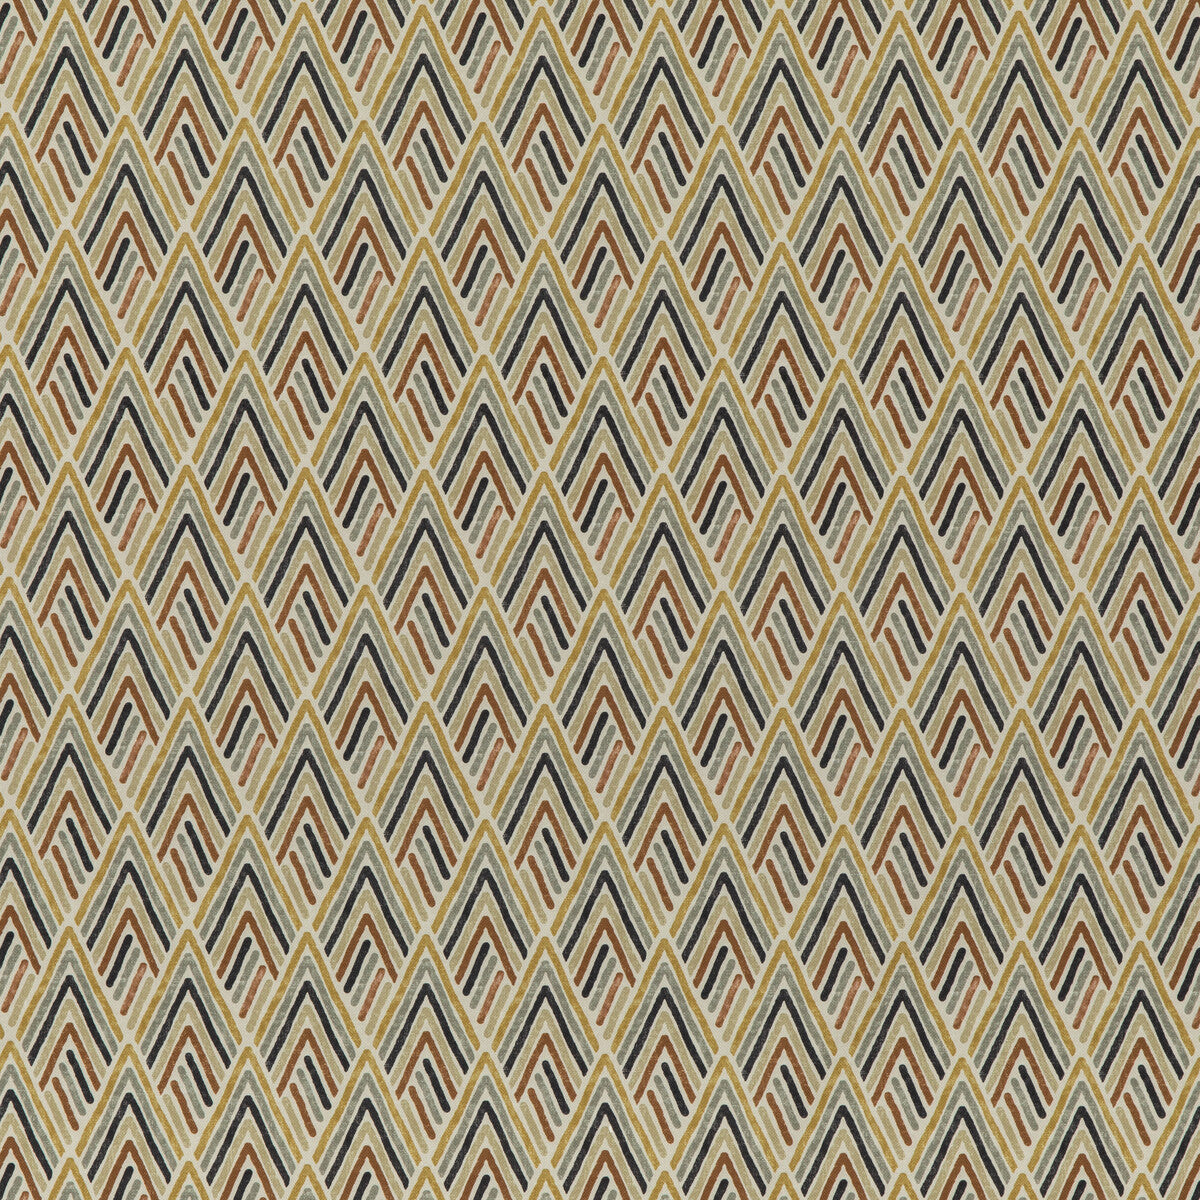 Vista fabric in spice color - pattern ED75041.2.0 - by Threads in the Nala Prints collection